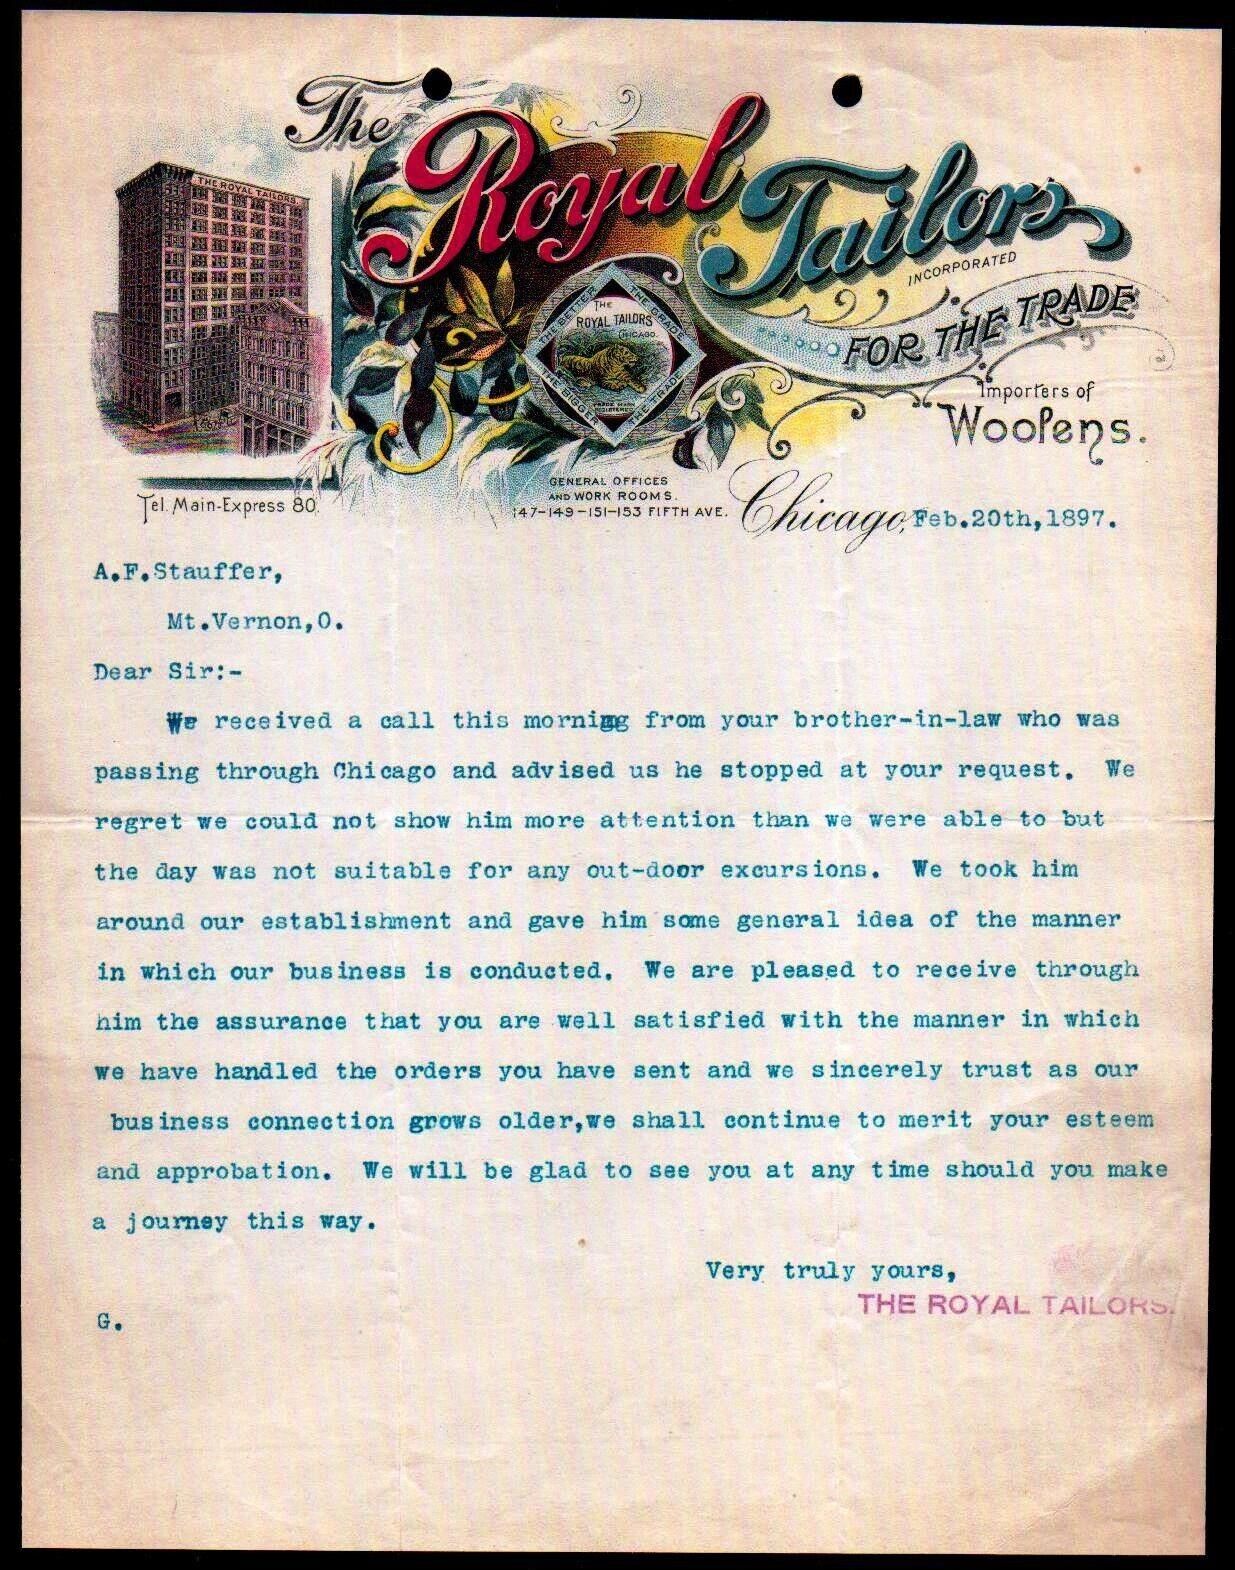 1897 Chicago - Royal Tailors - Woolens - Rare Color Letter Head Bill